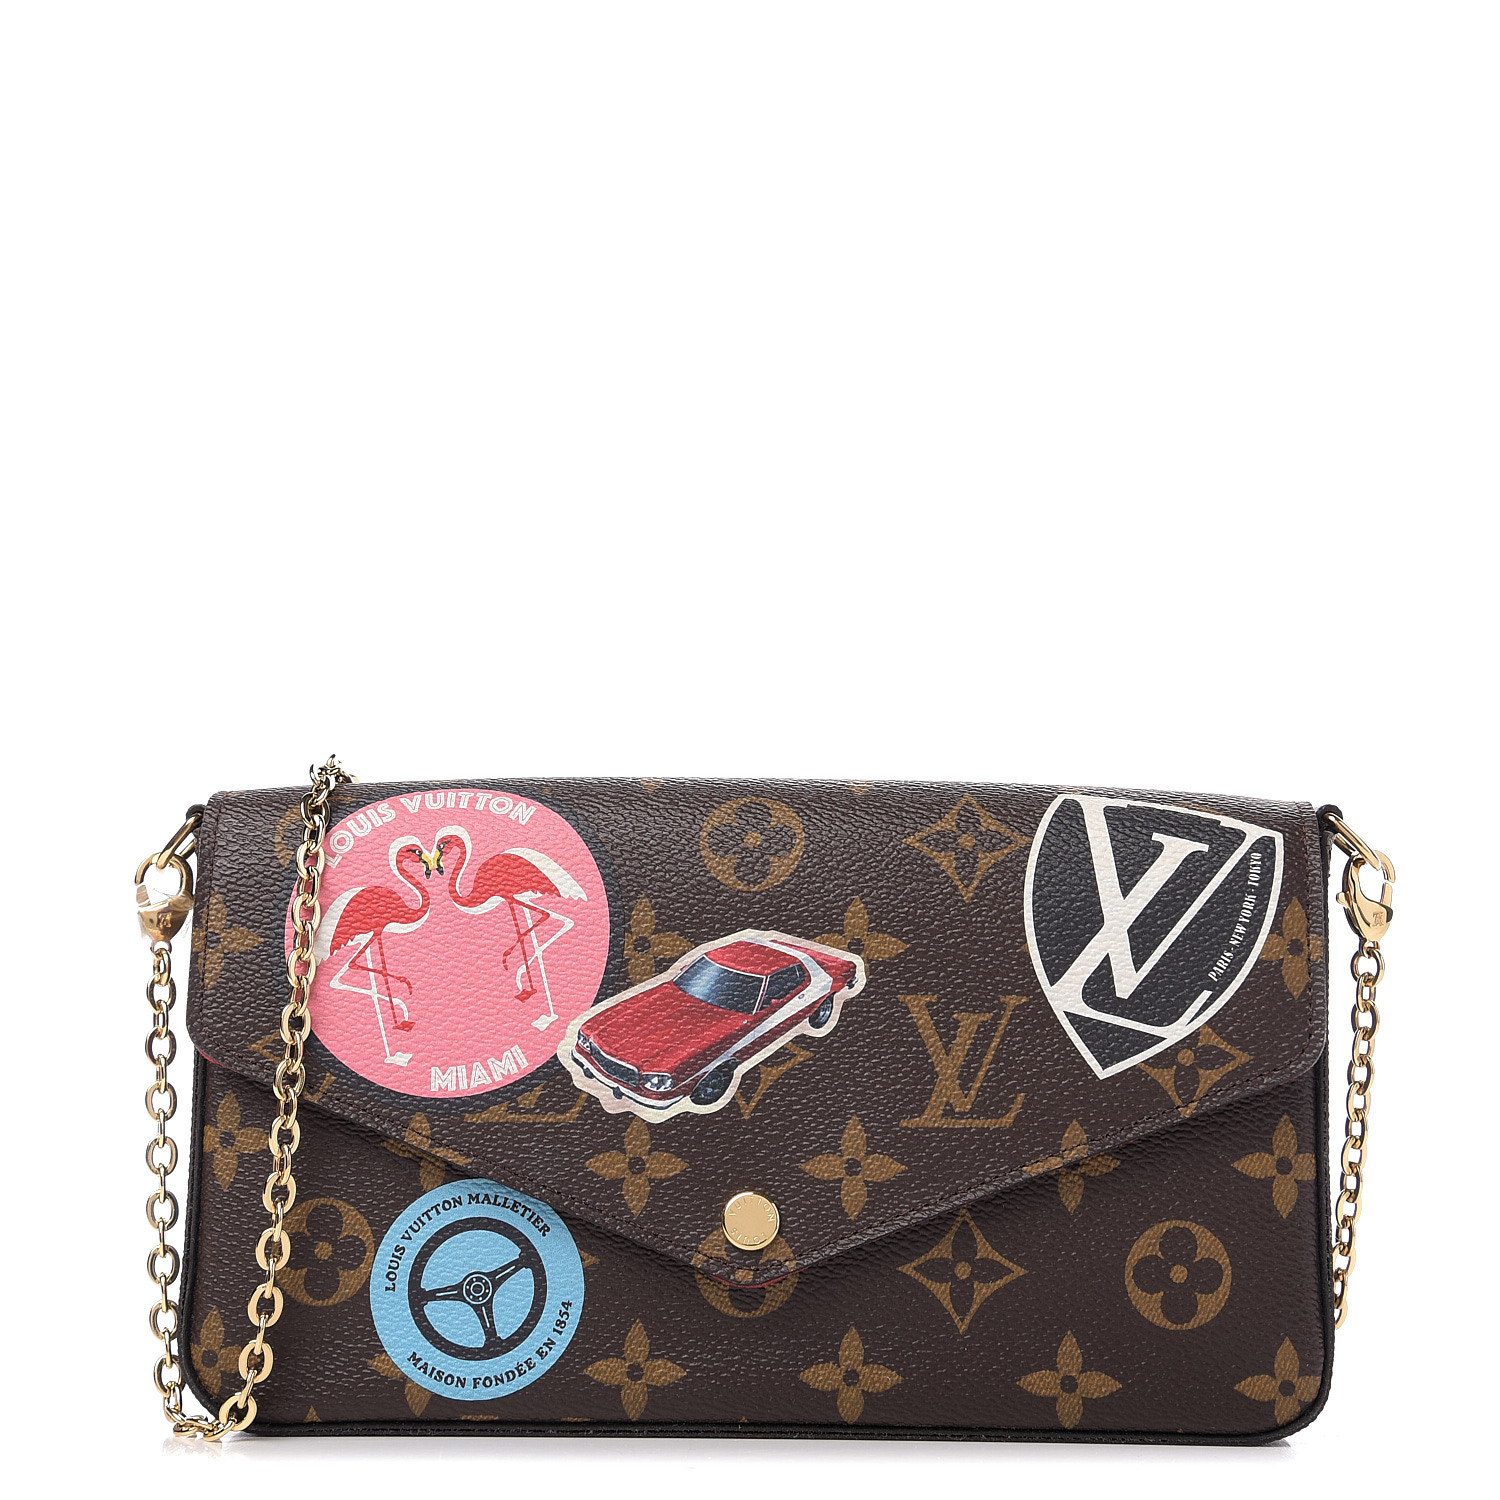 POCHETTE FELICIE LOUIS VUITTON With WHAT FITS And MOD SHOTS 